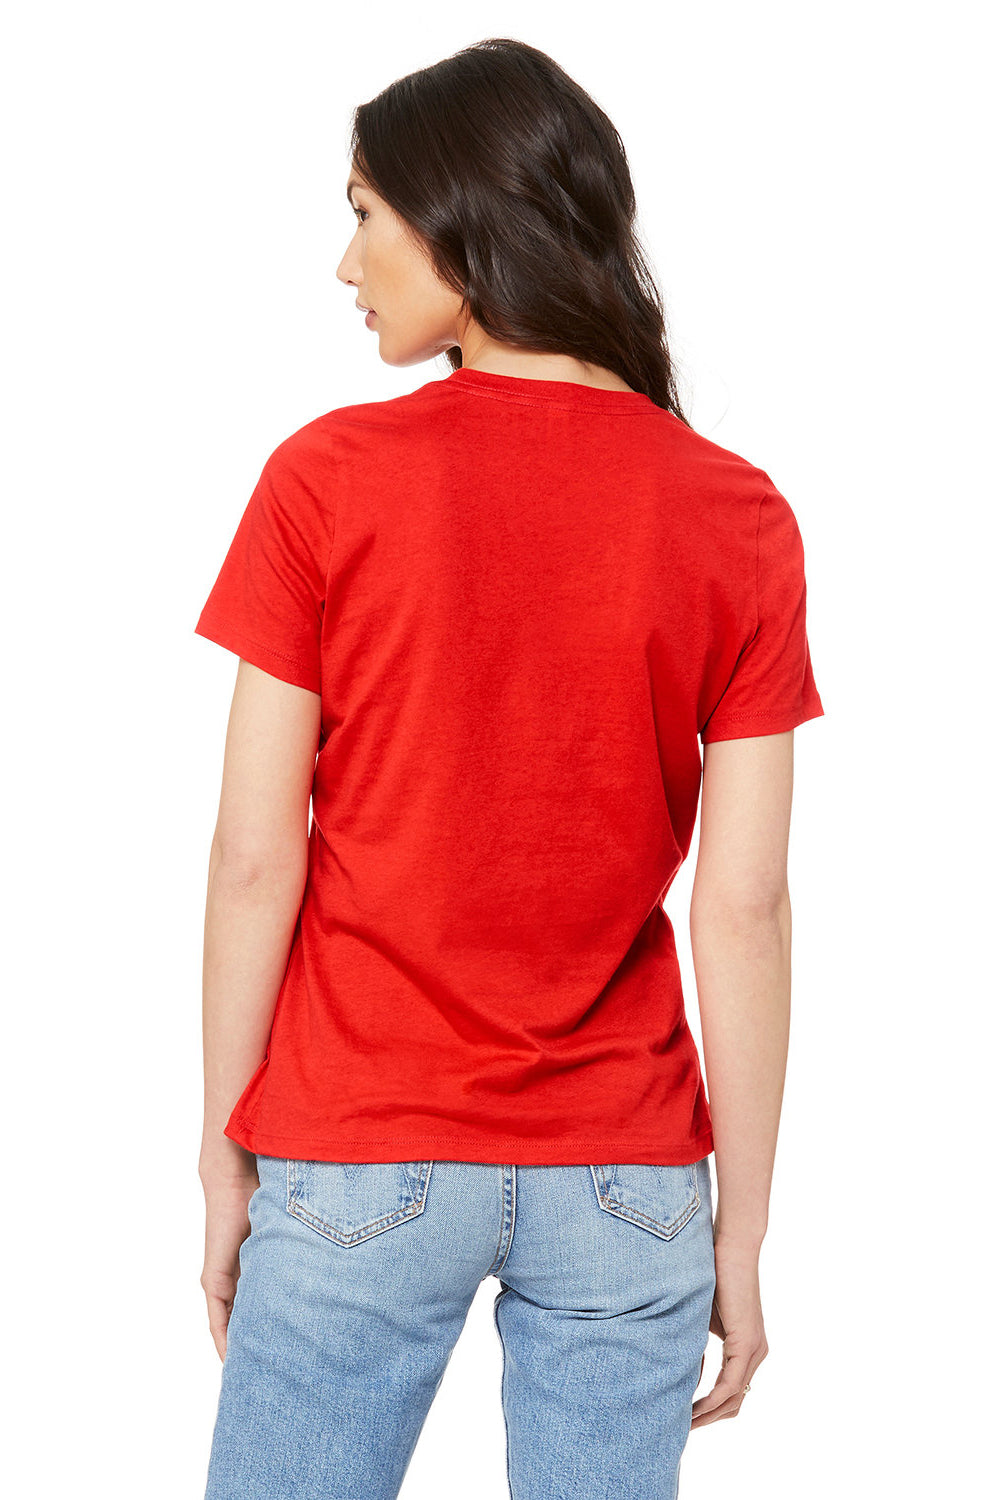 Bella + Canvas BC6400/B6400/6400 Womens Relaxed Jersey Short Sleeve Crewneck T-Shirt Poppy Red Model Back